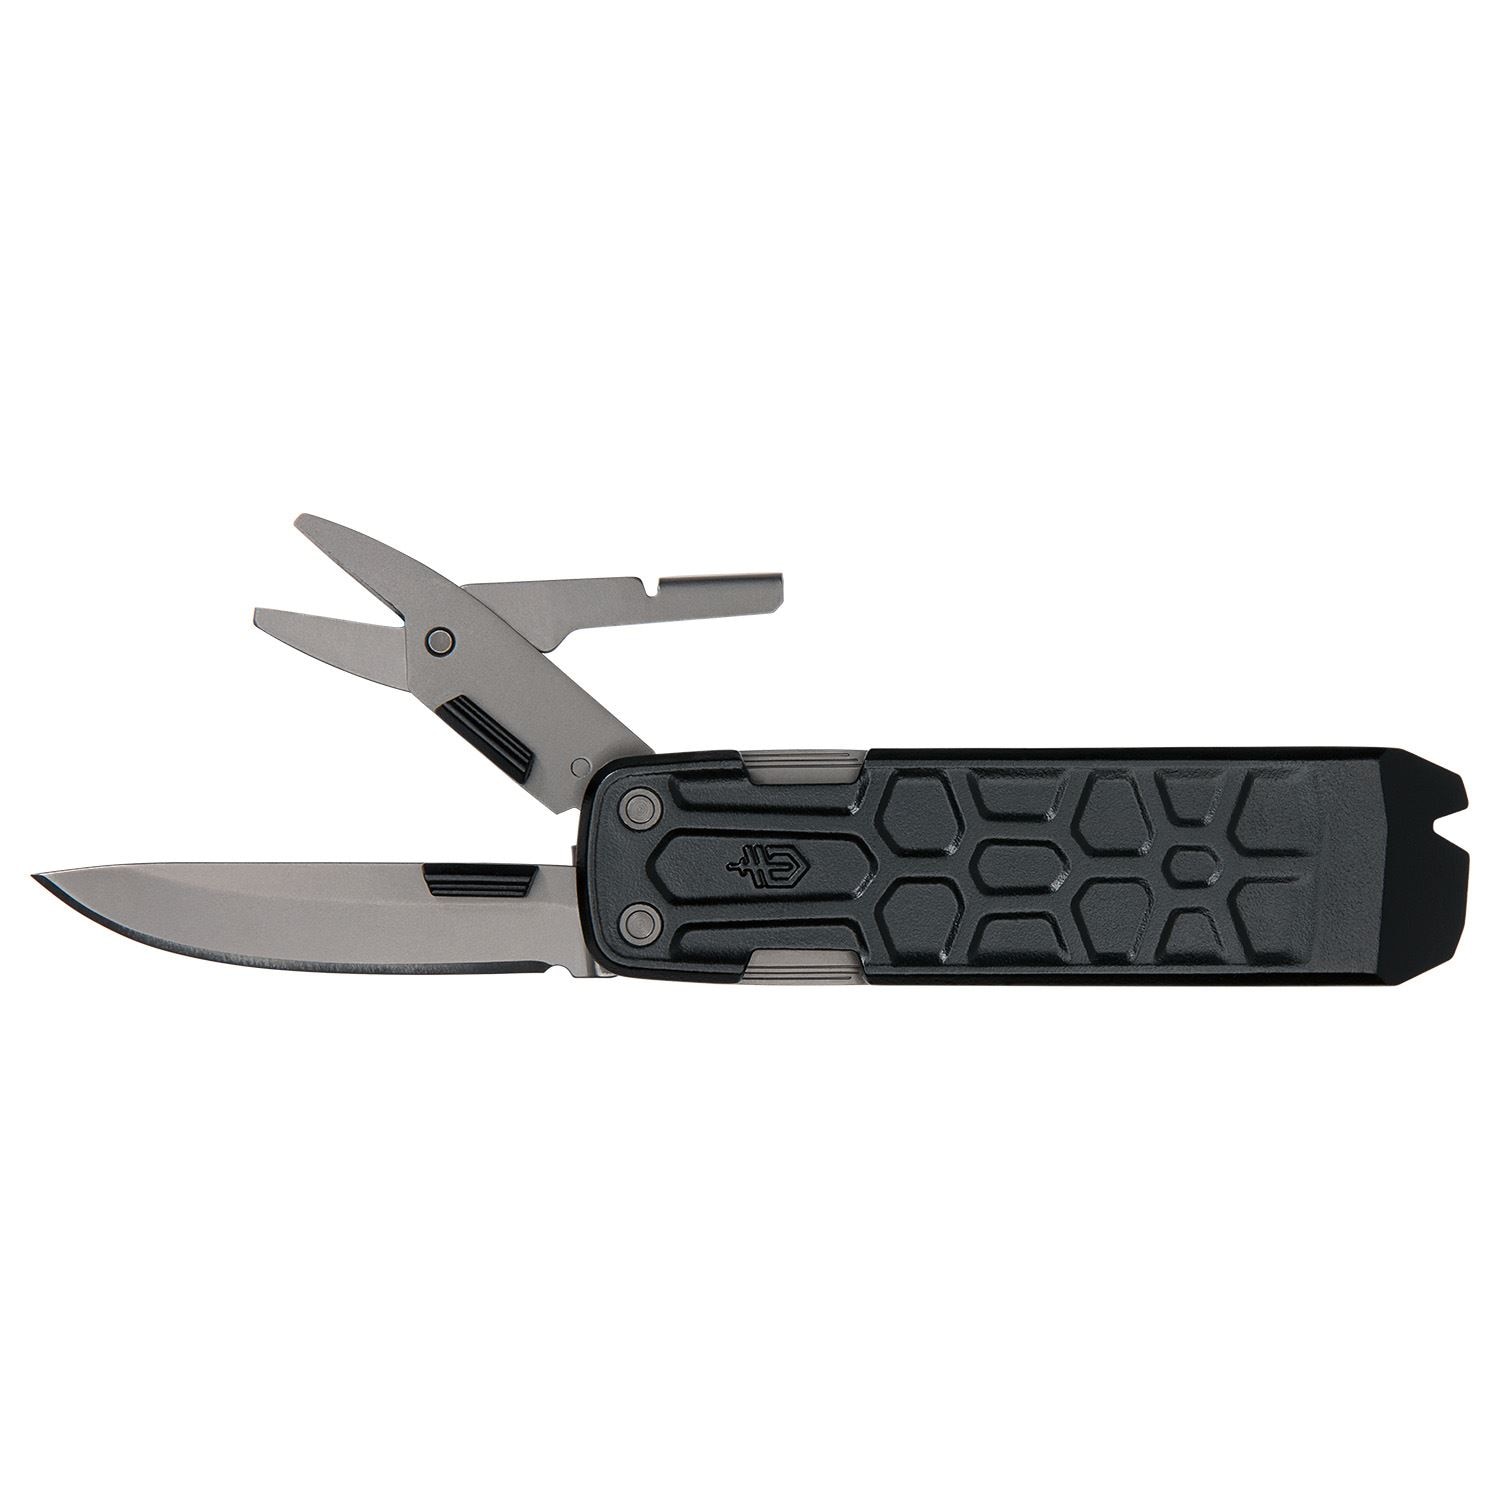 New Gerber Prybrid X, an EDC Knife and Multi-Tool